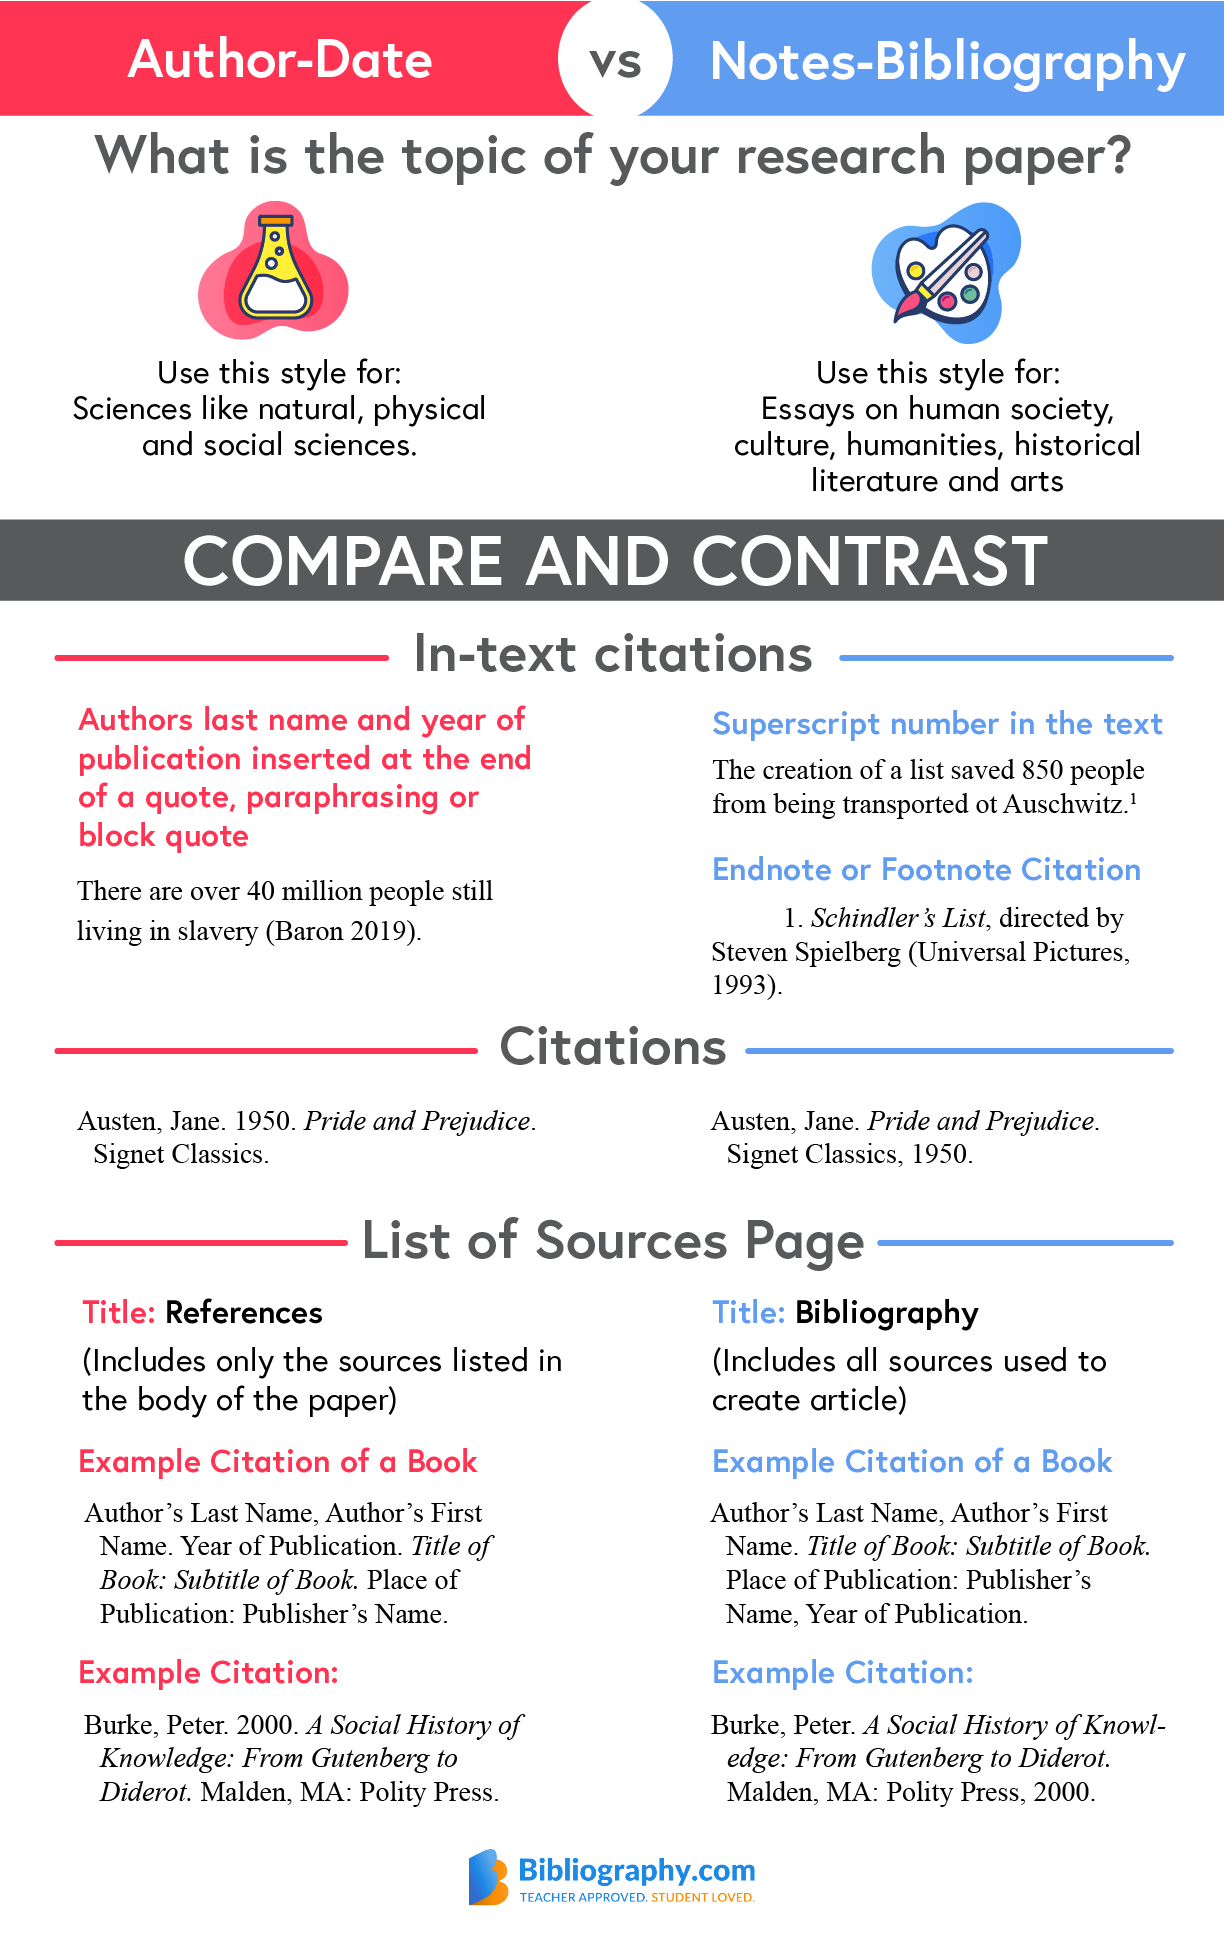 Author-date versus Notes-bibliography infographic